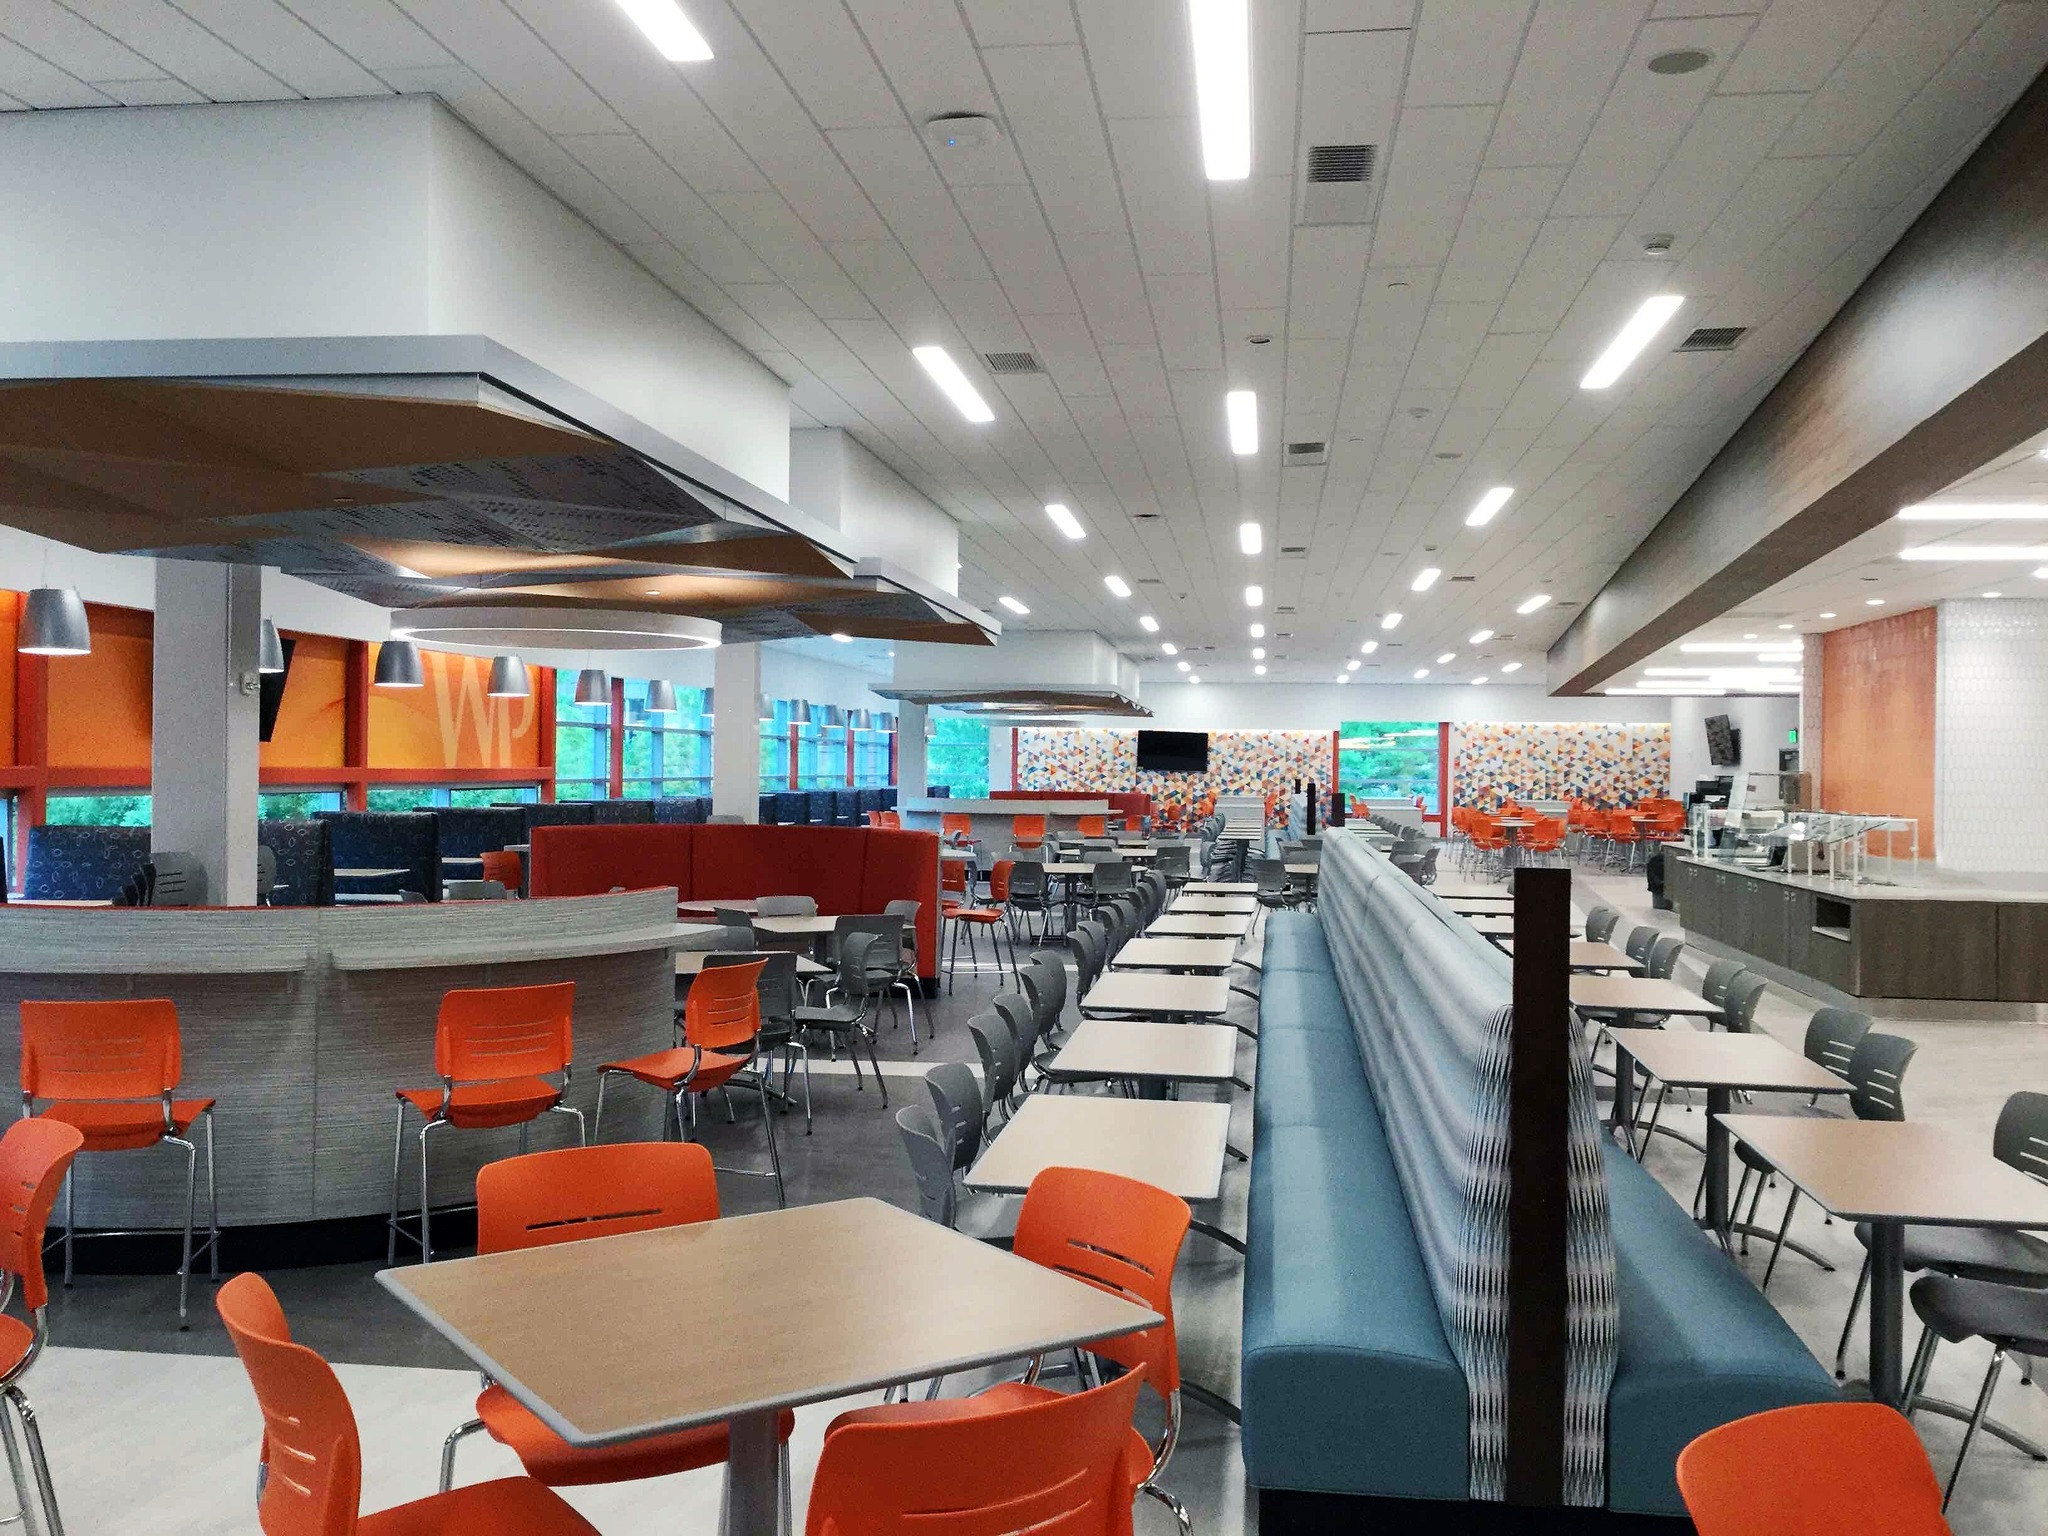 Project Spotlight: Renovated $7M Dining Hall at William Paterson University